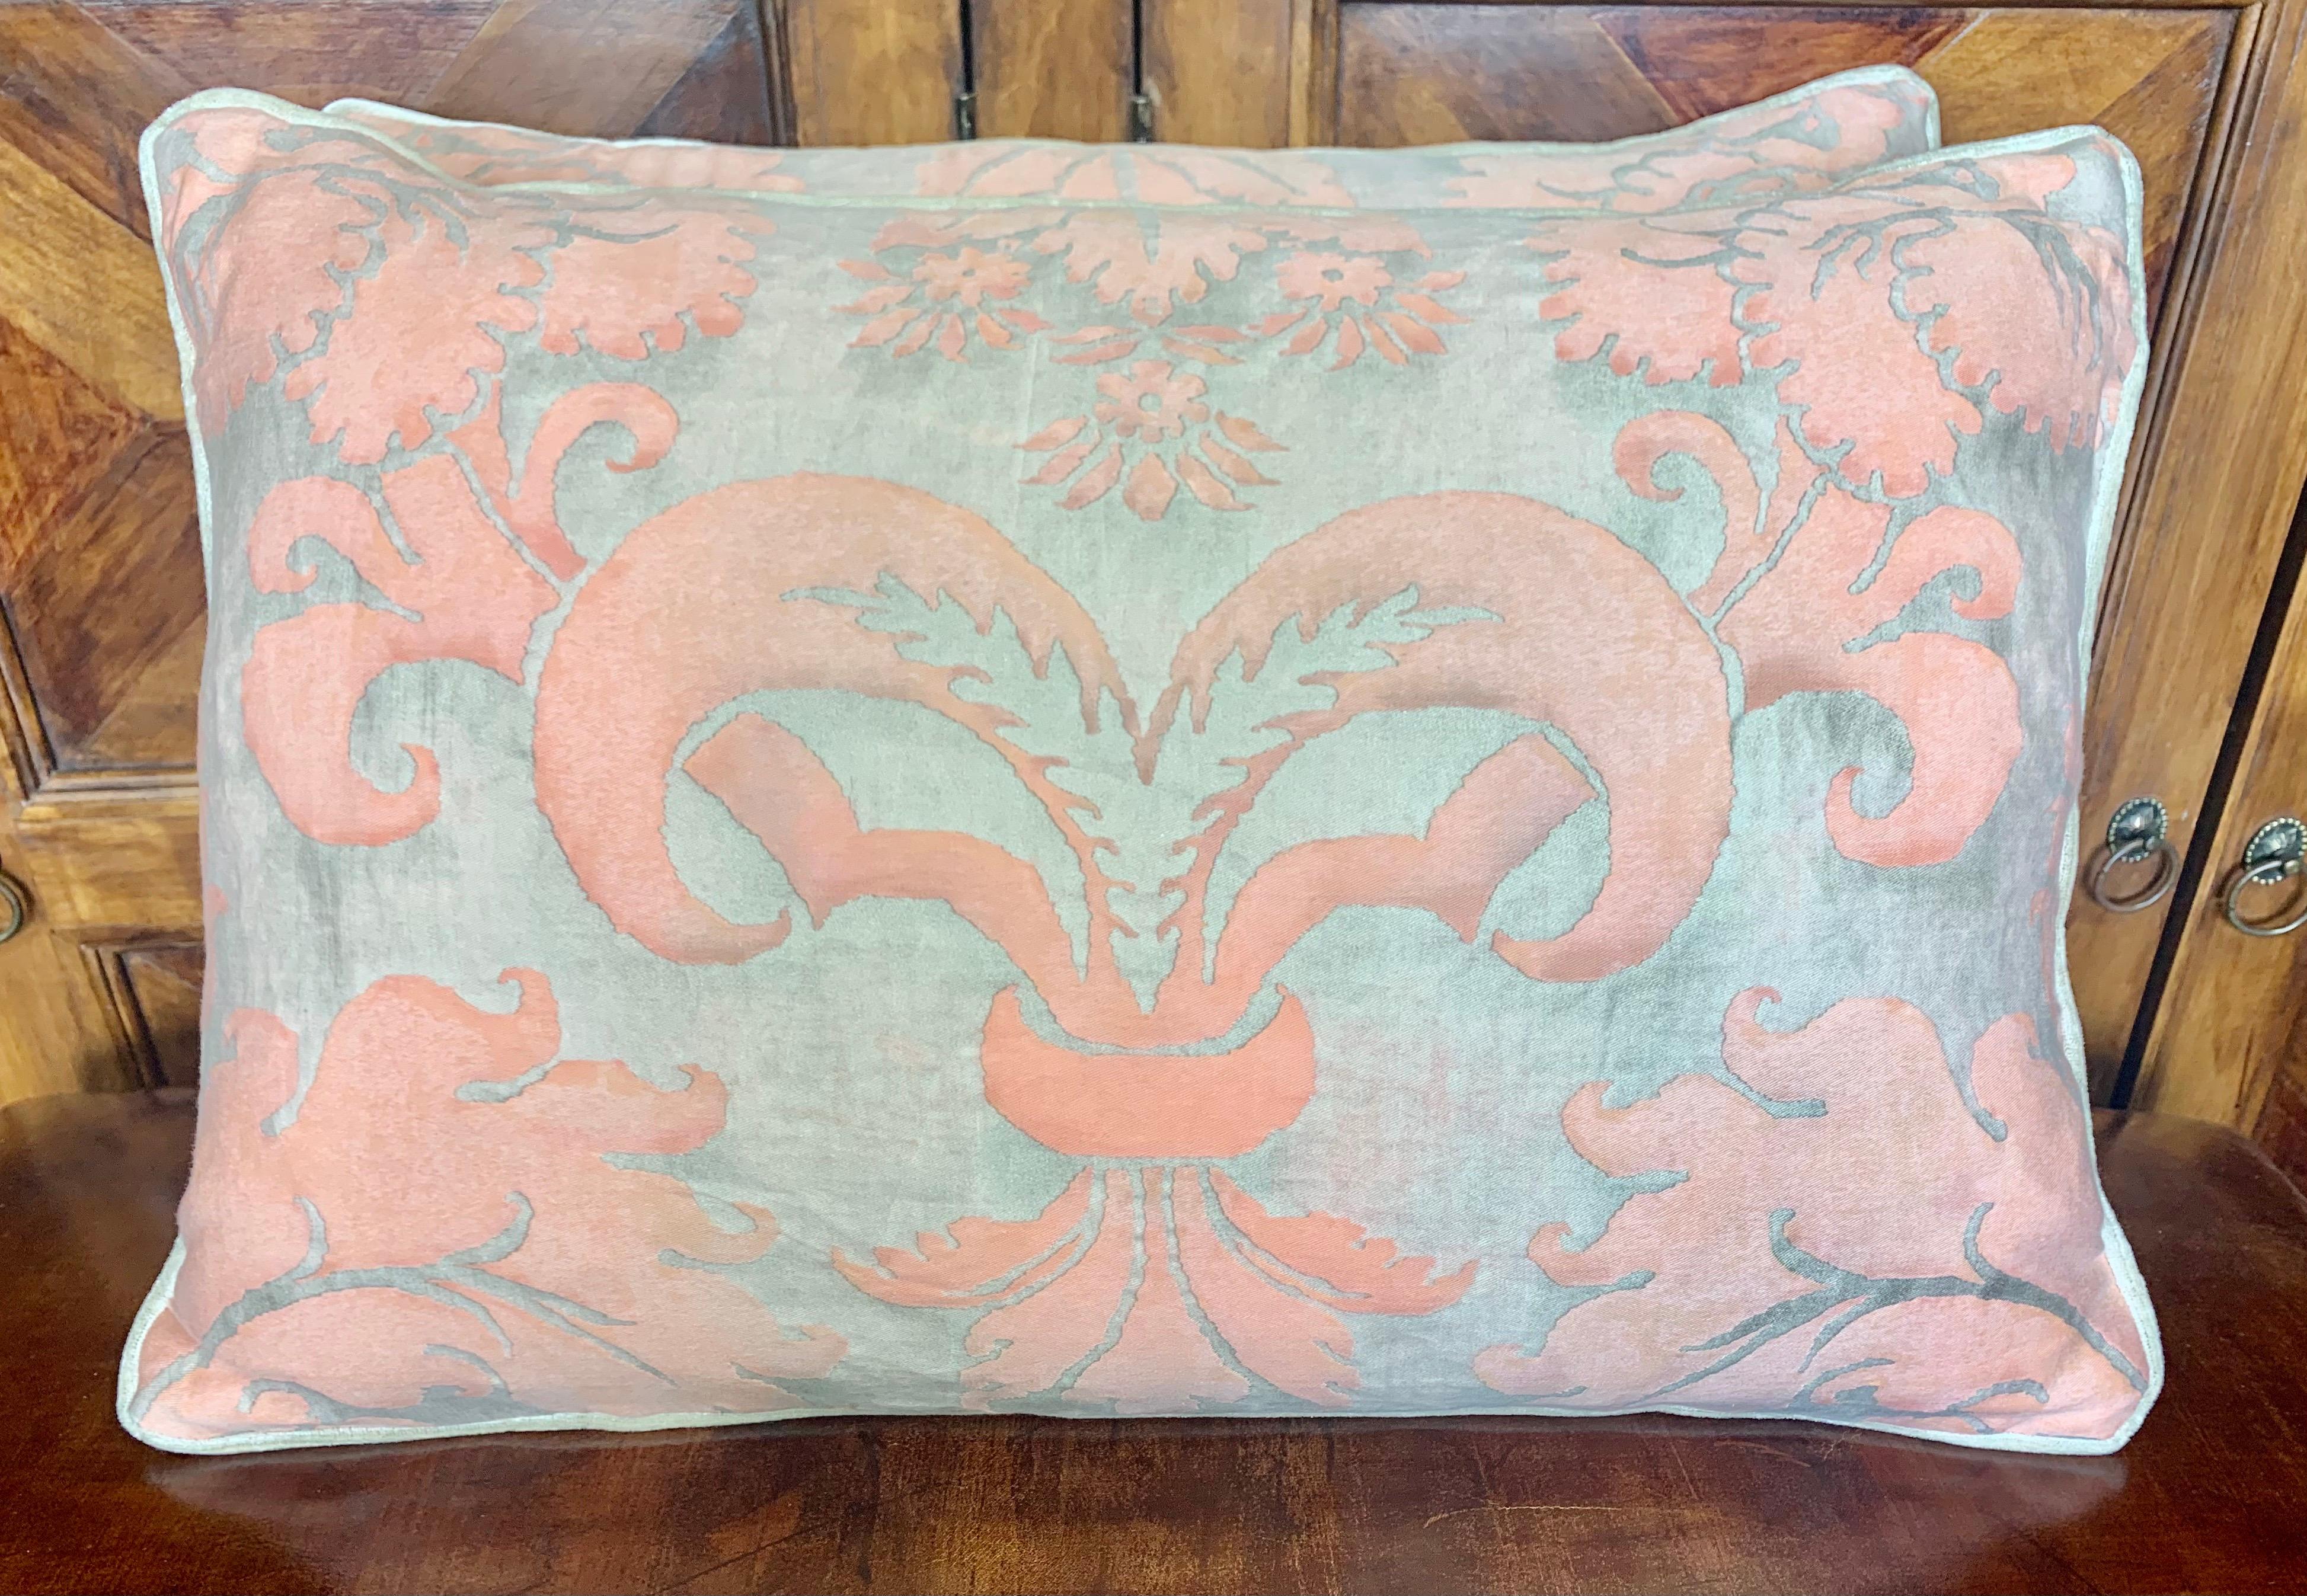 20th Century Pair of Vintage Glicine Patterned Fortuny Textile Pillows